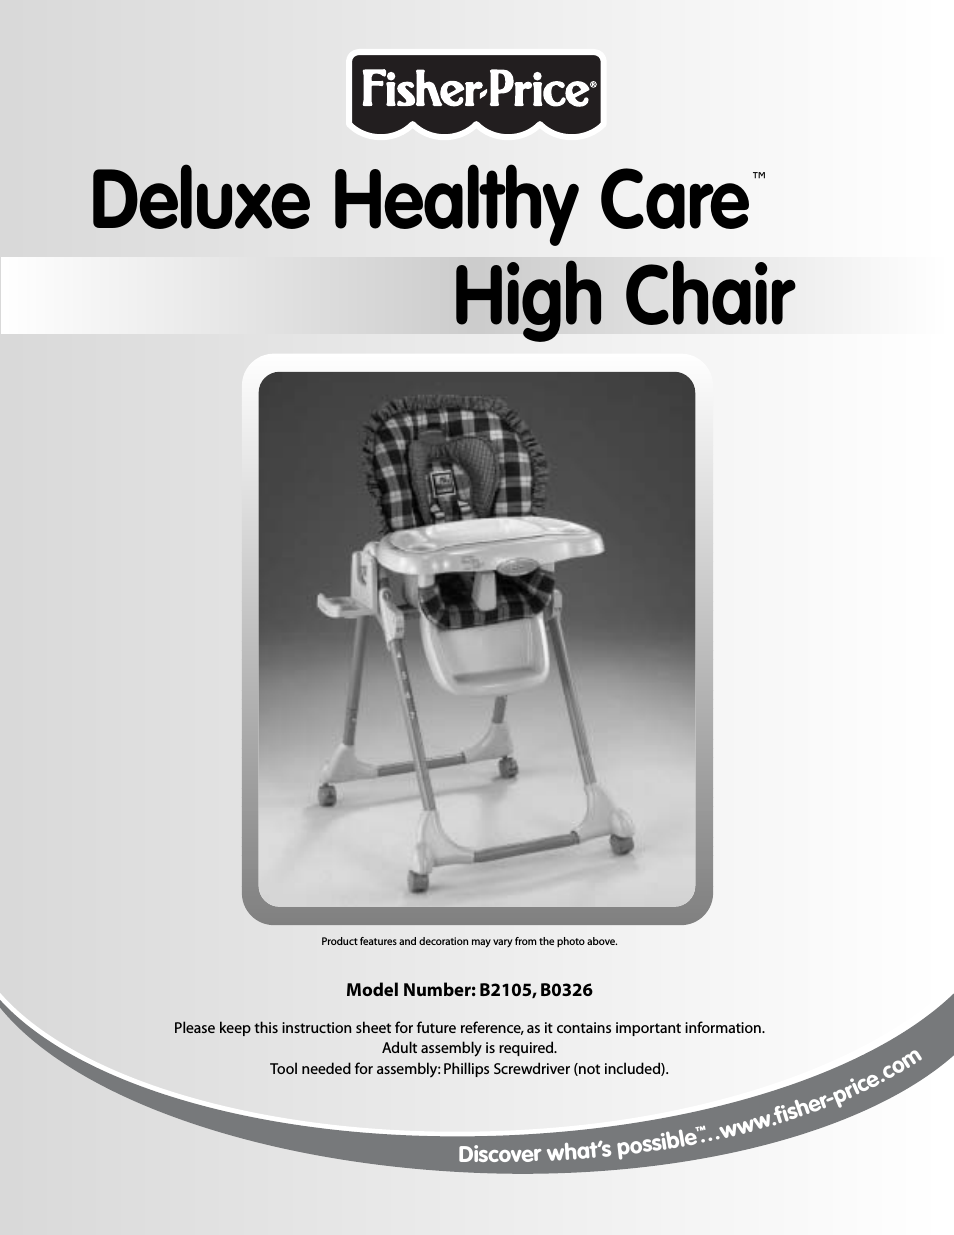 DELUXE HEALTHY CARE B2105